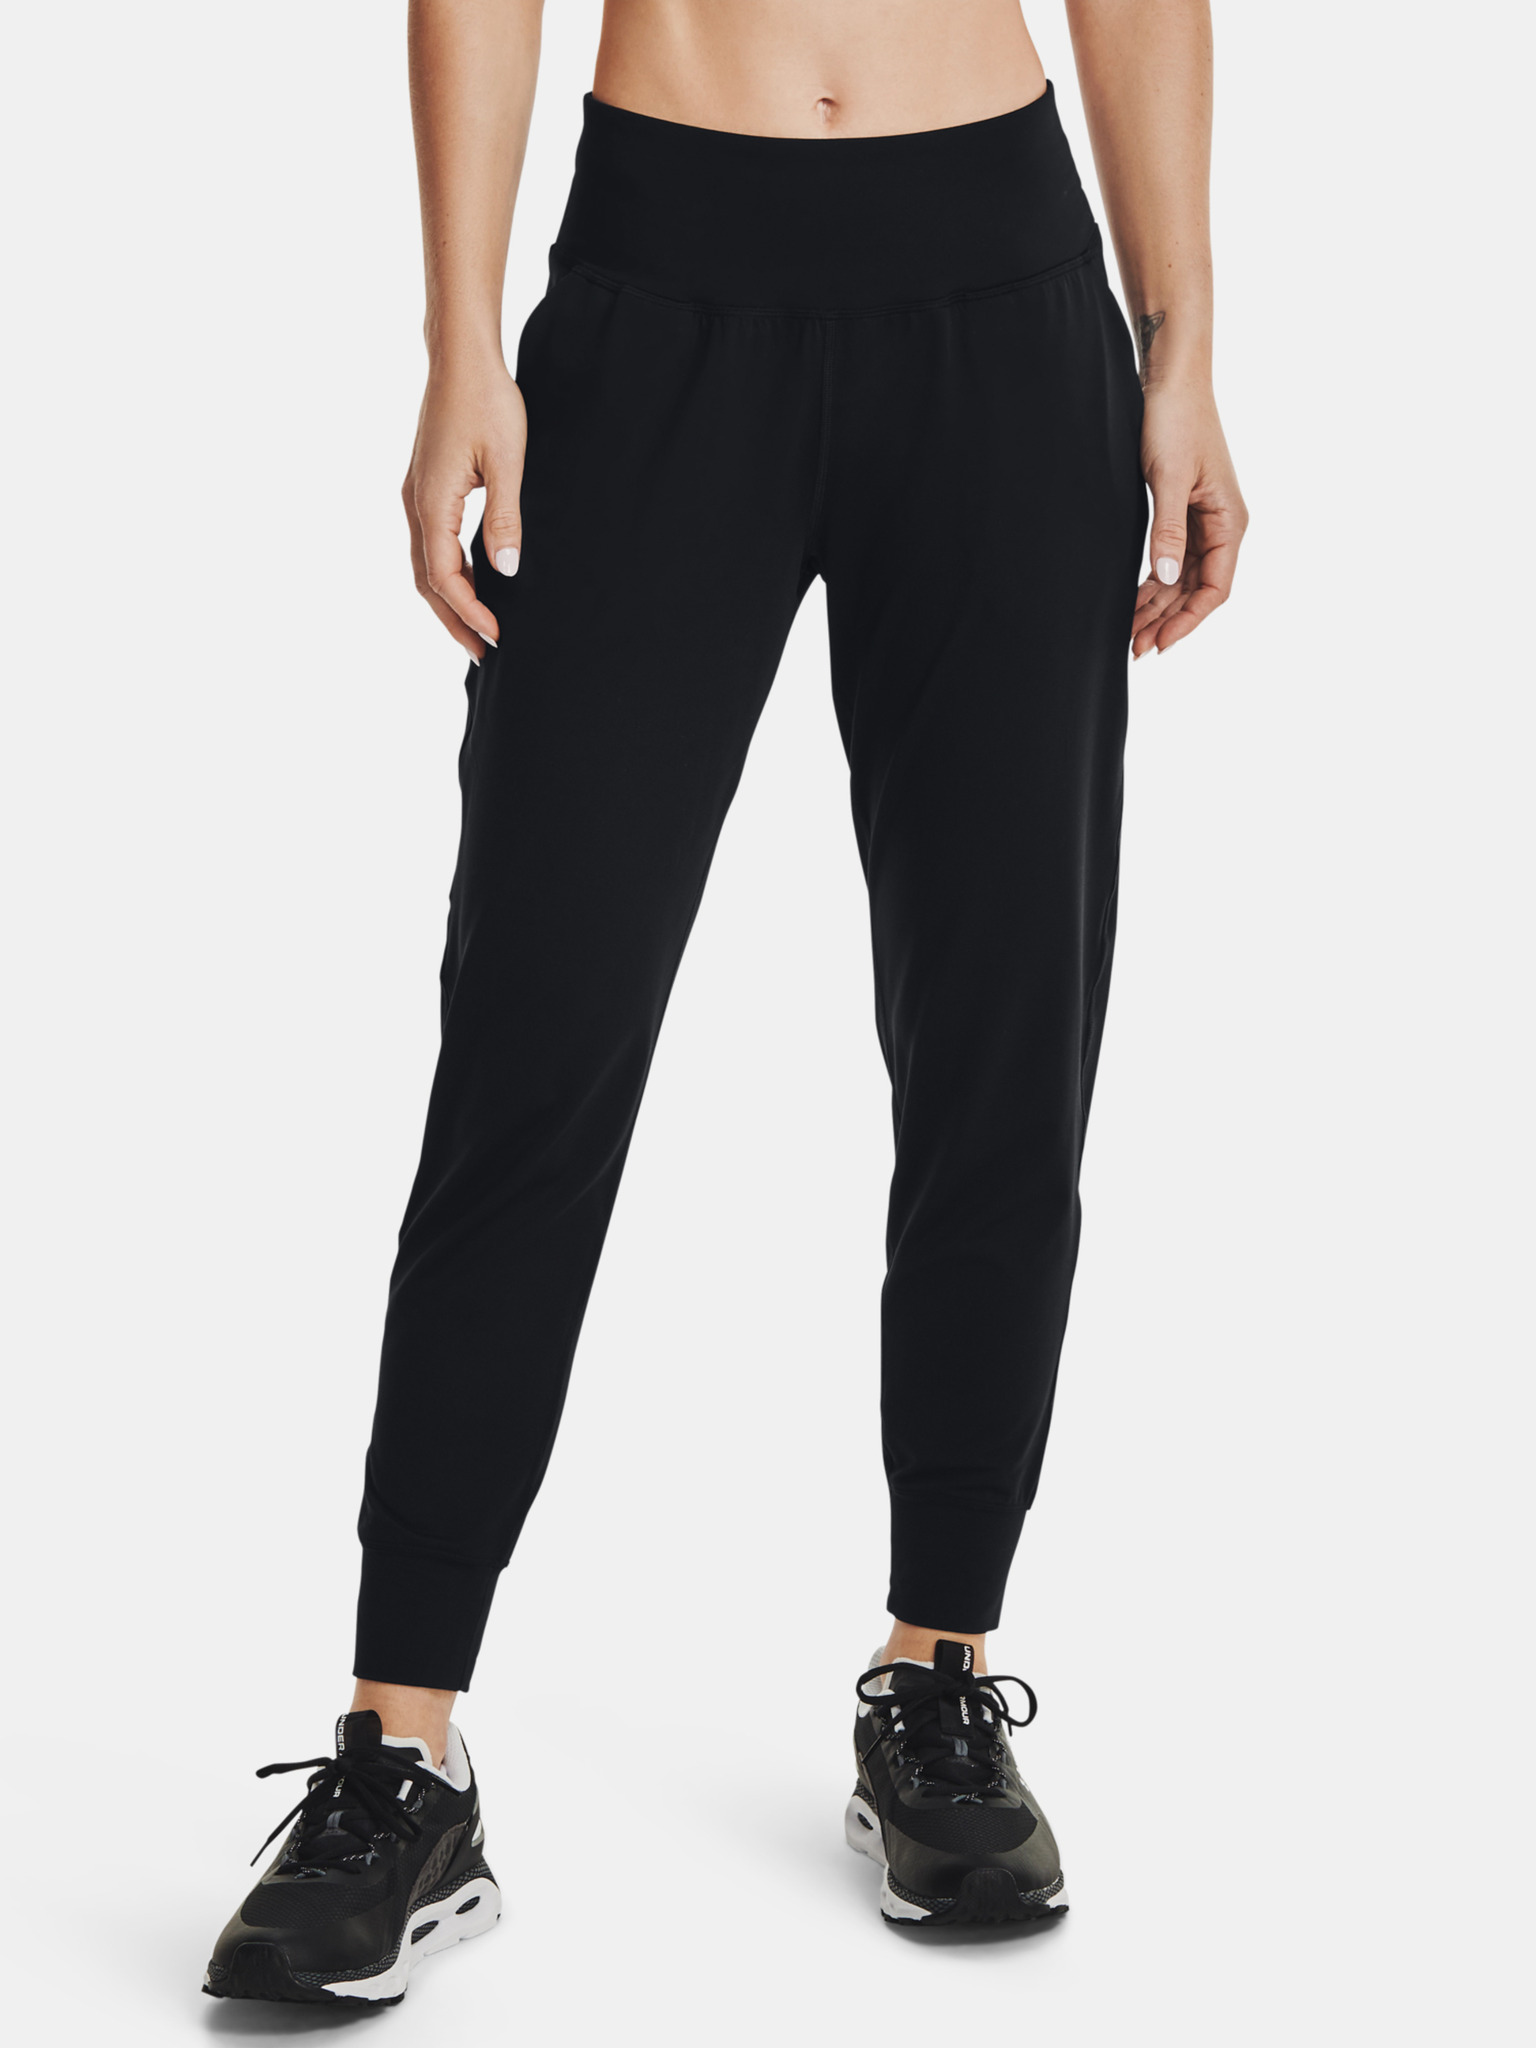 Under Armour Logo Waistband Sweatpants in Black